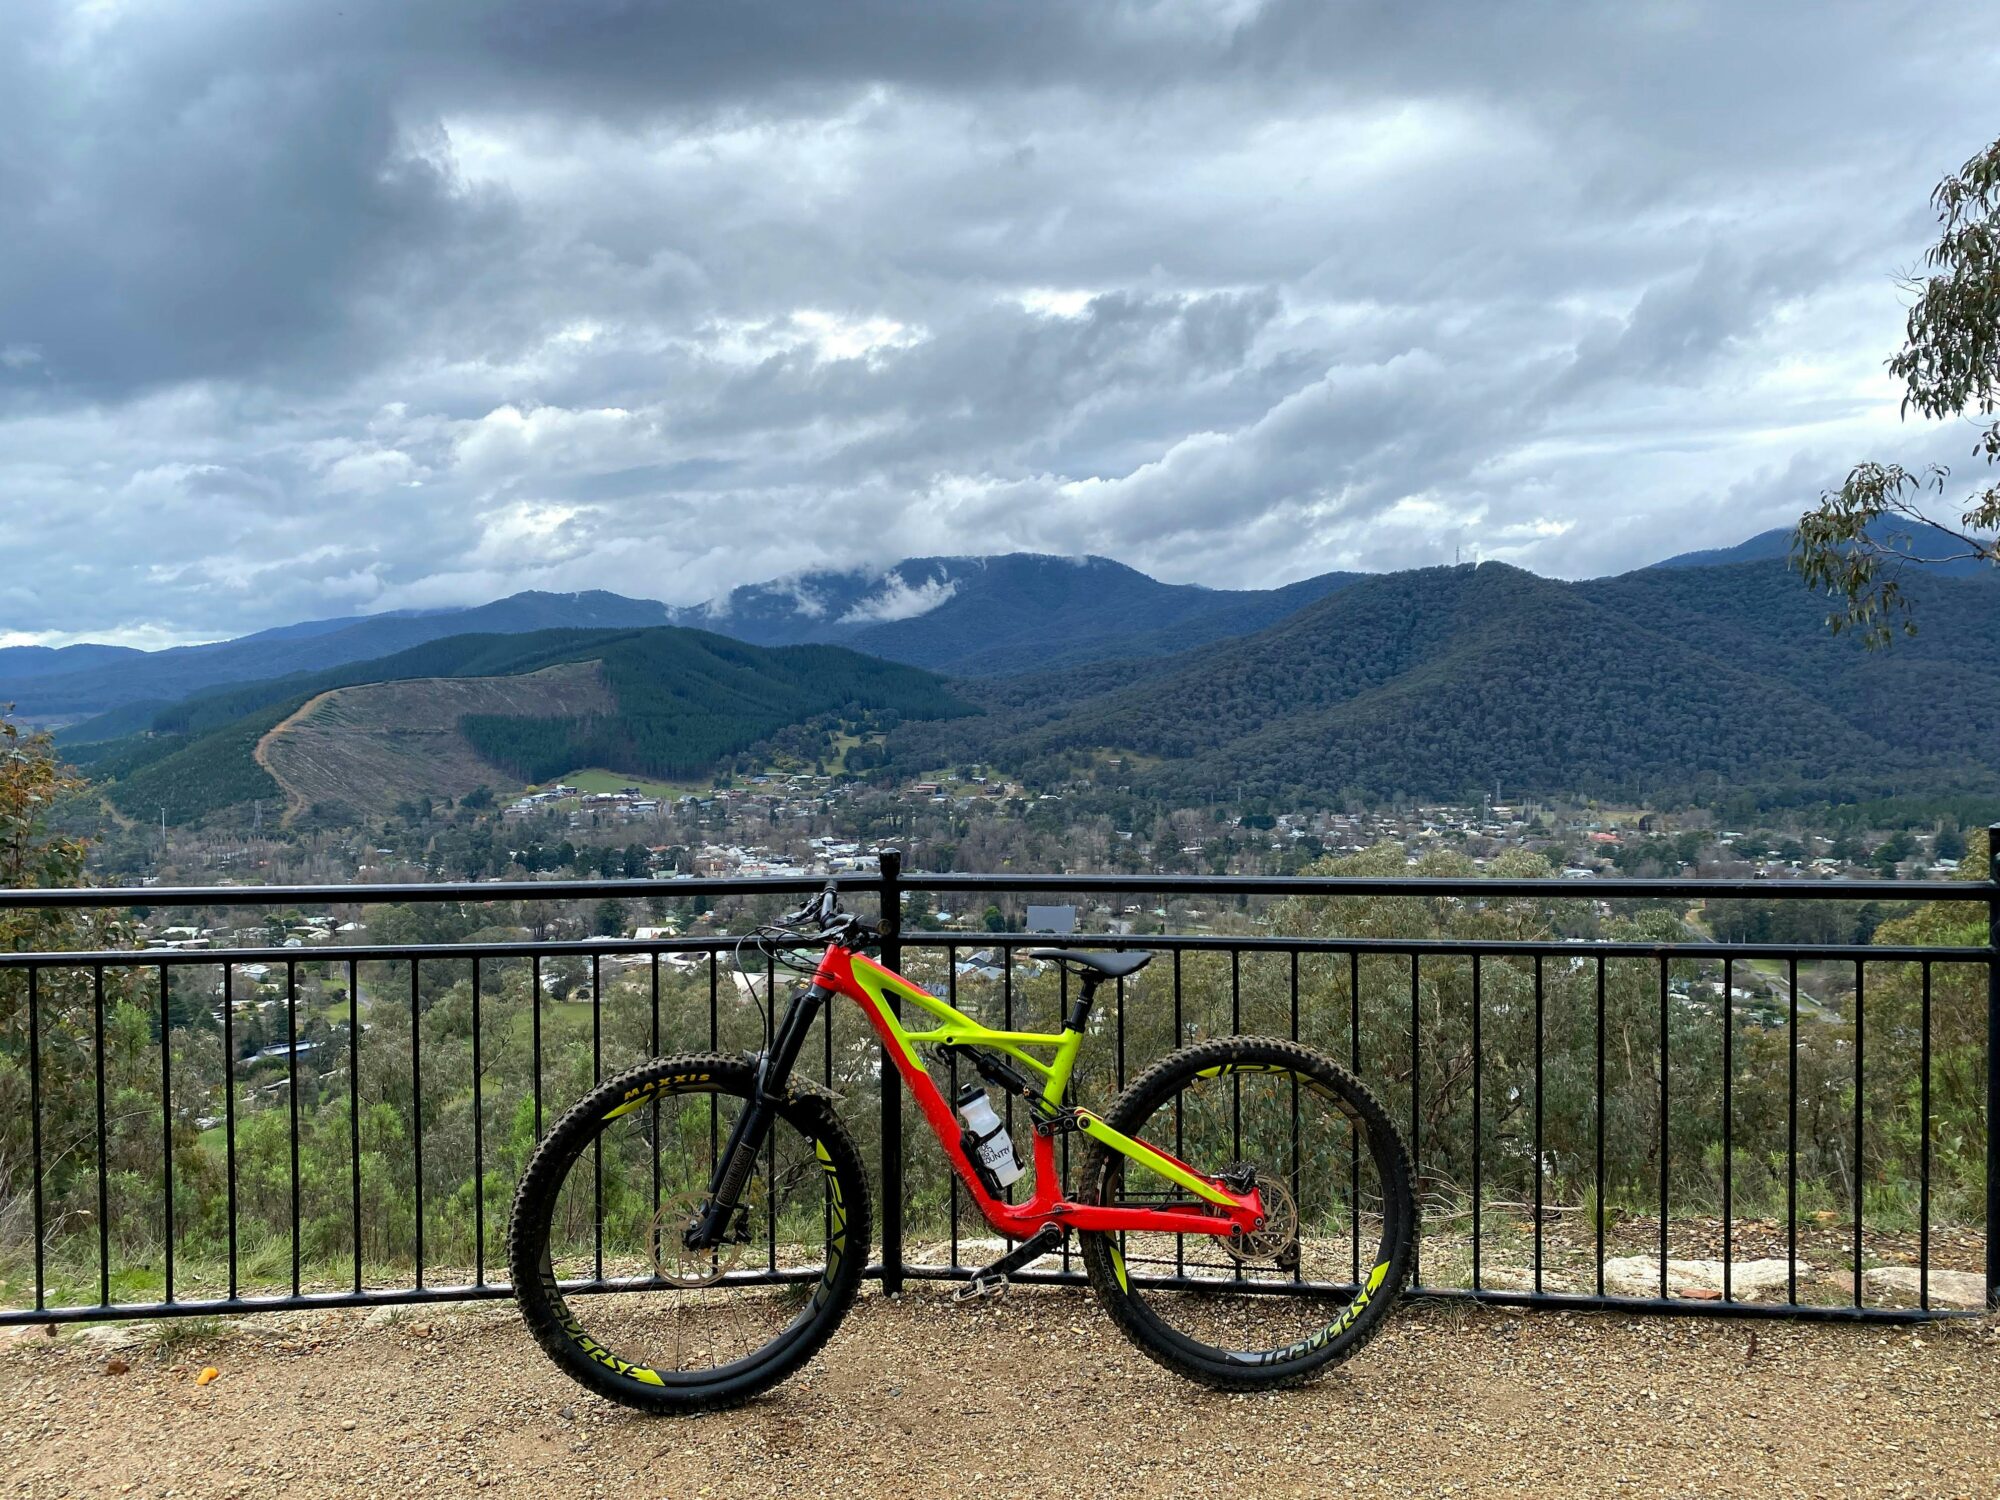 A red and yellow mountain bike leans against a fence with a view of mountains and towns behind.